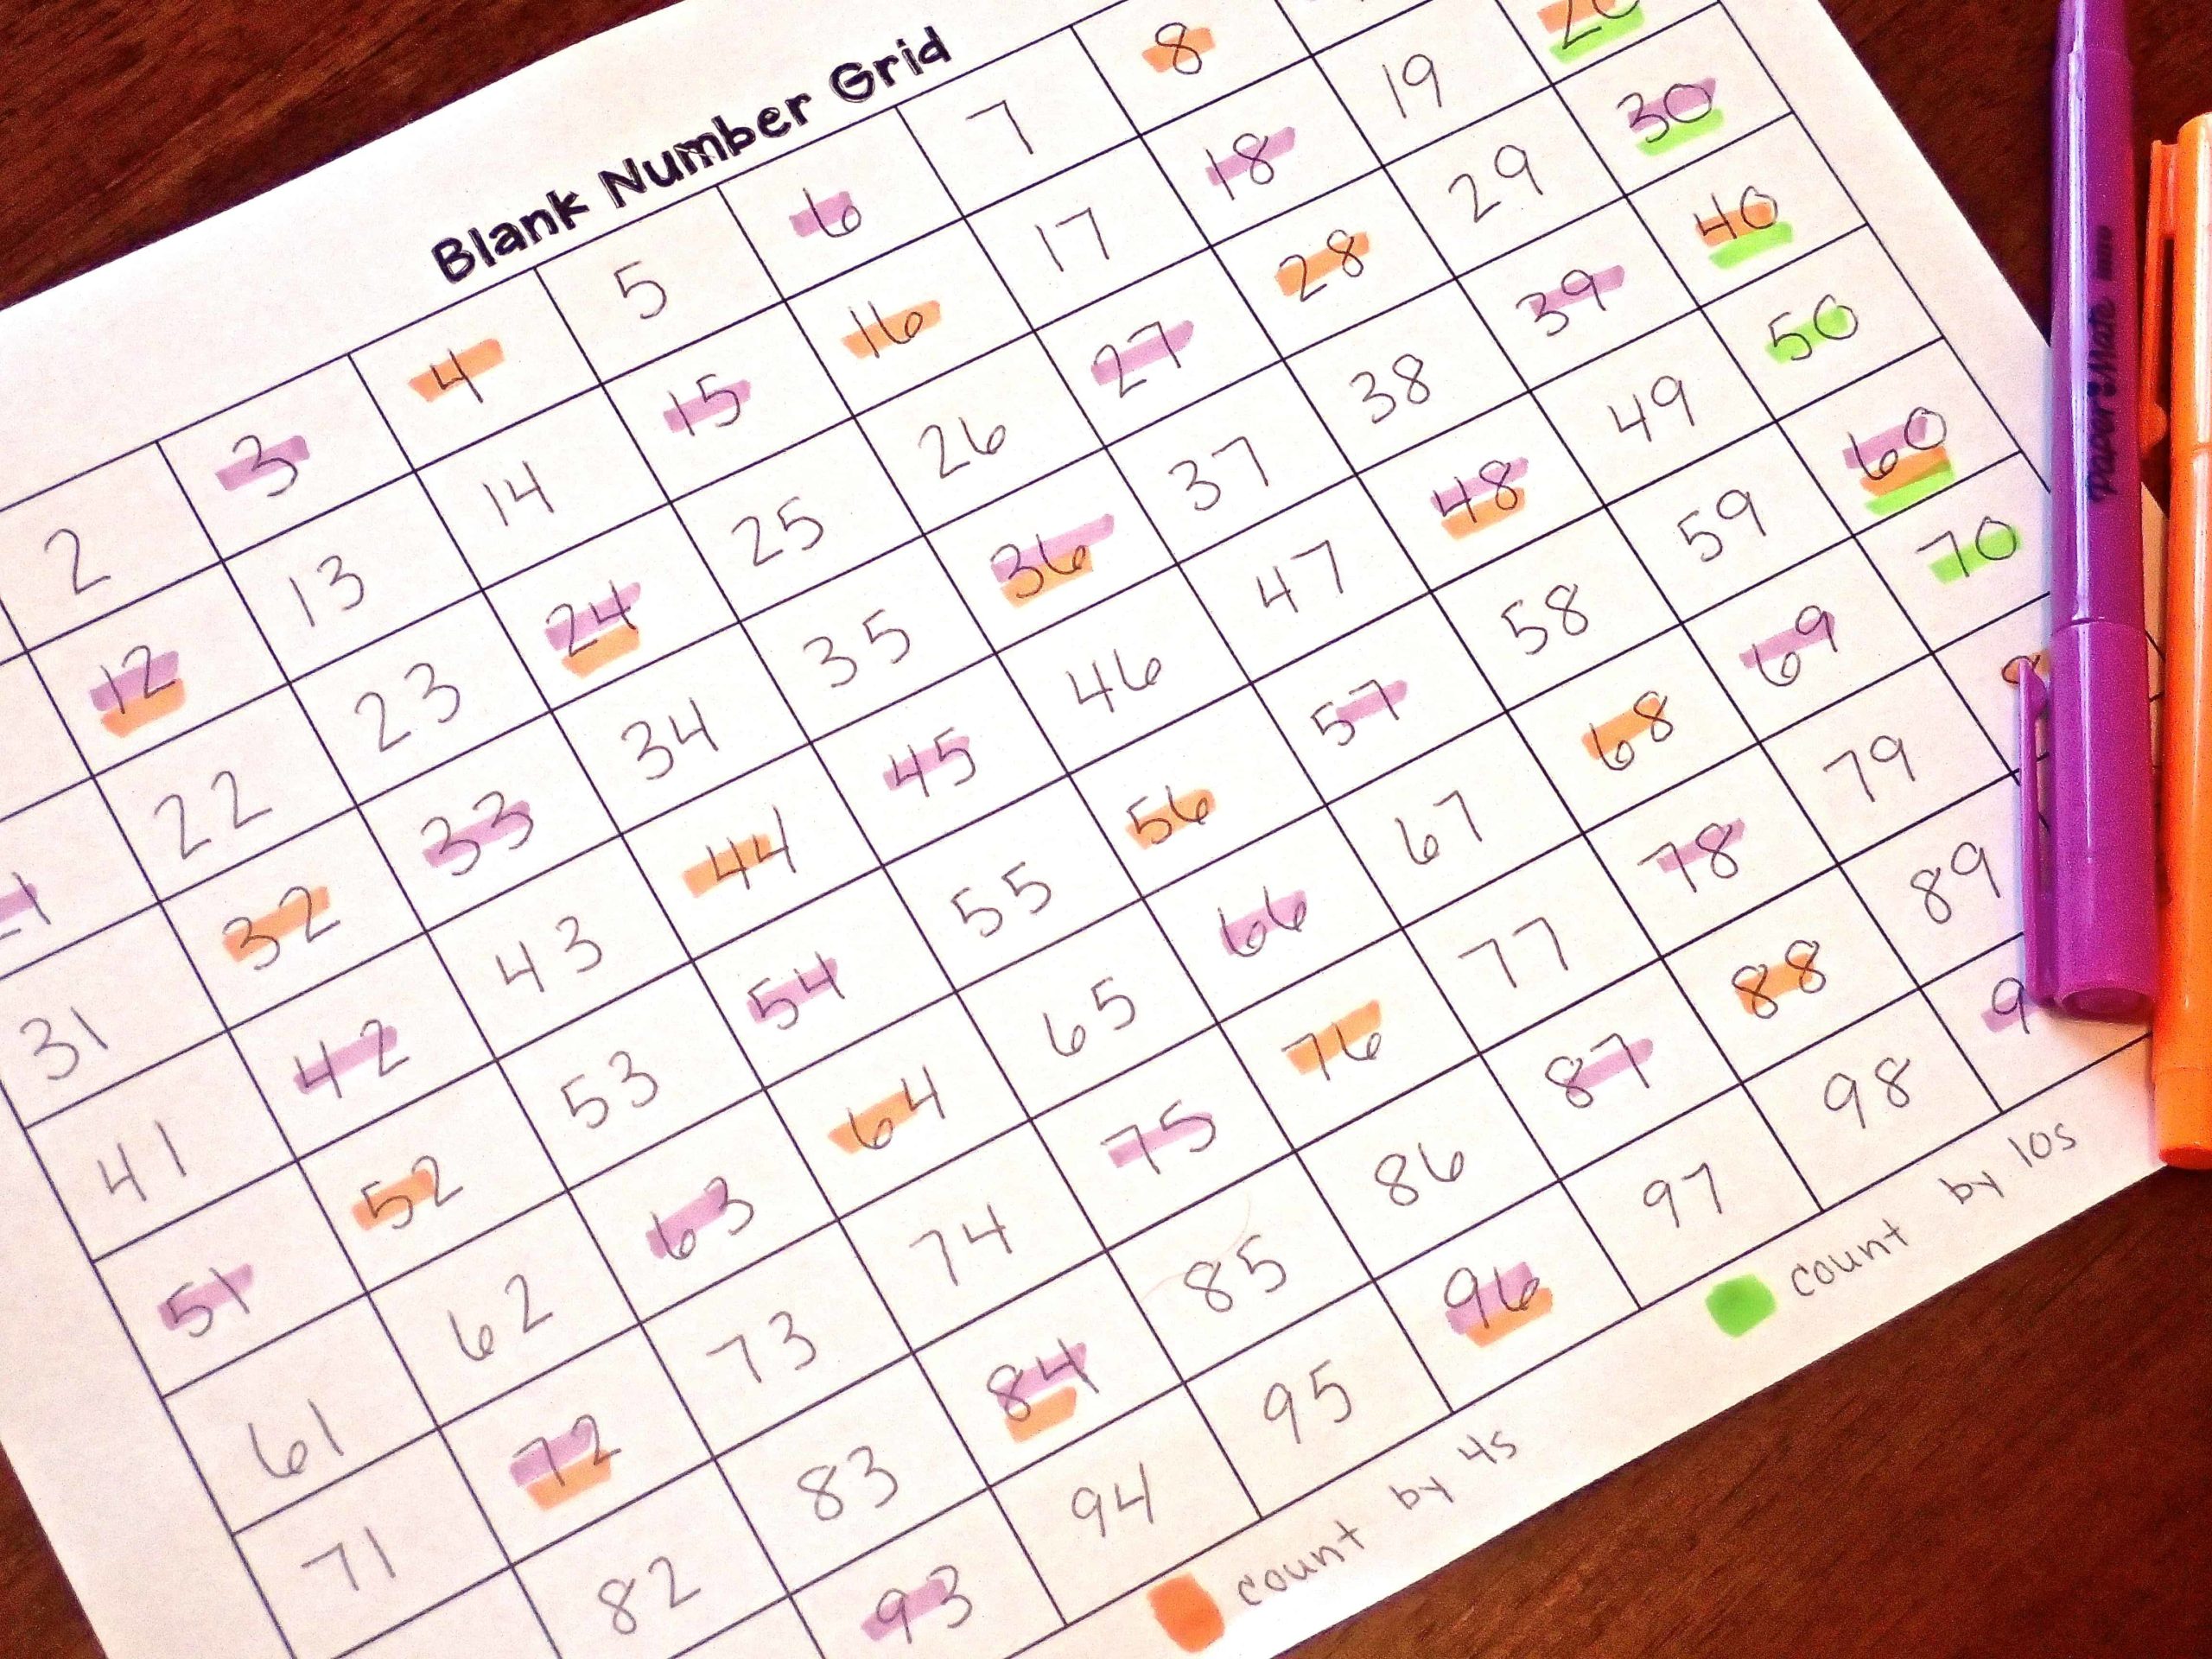 10 Different Ways to Use a Number Grid - have students find patterns in the number grid.  